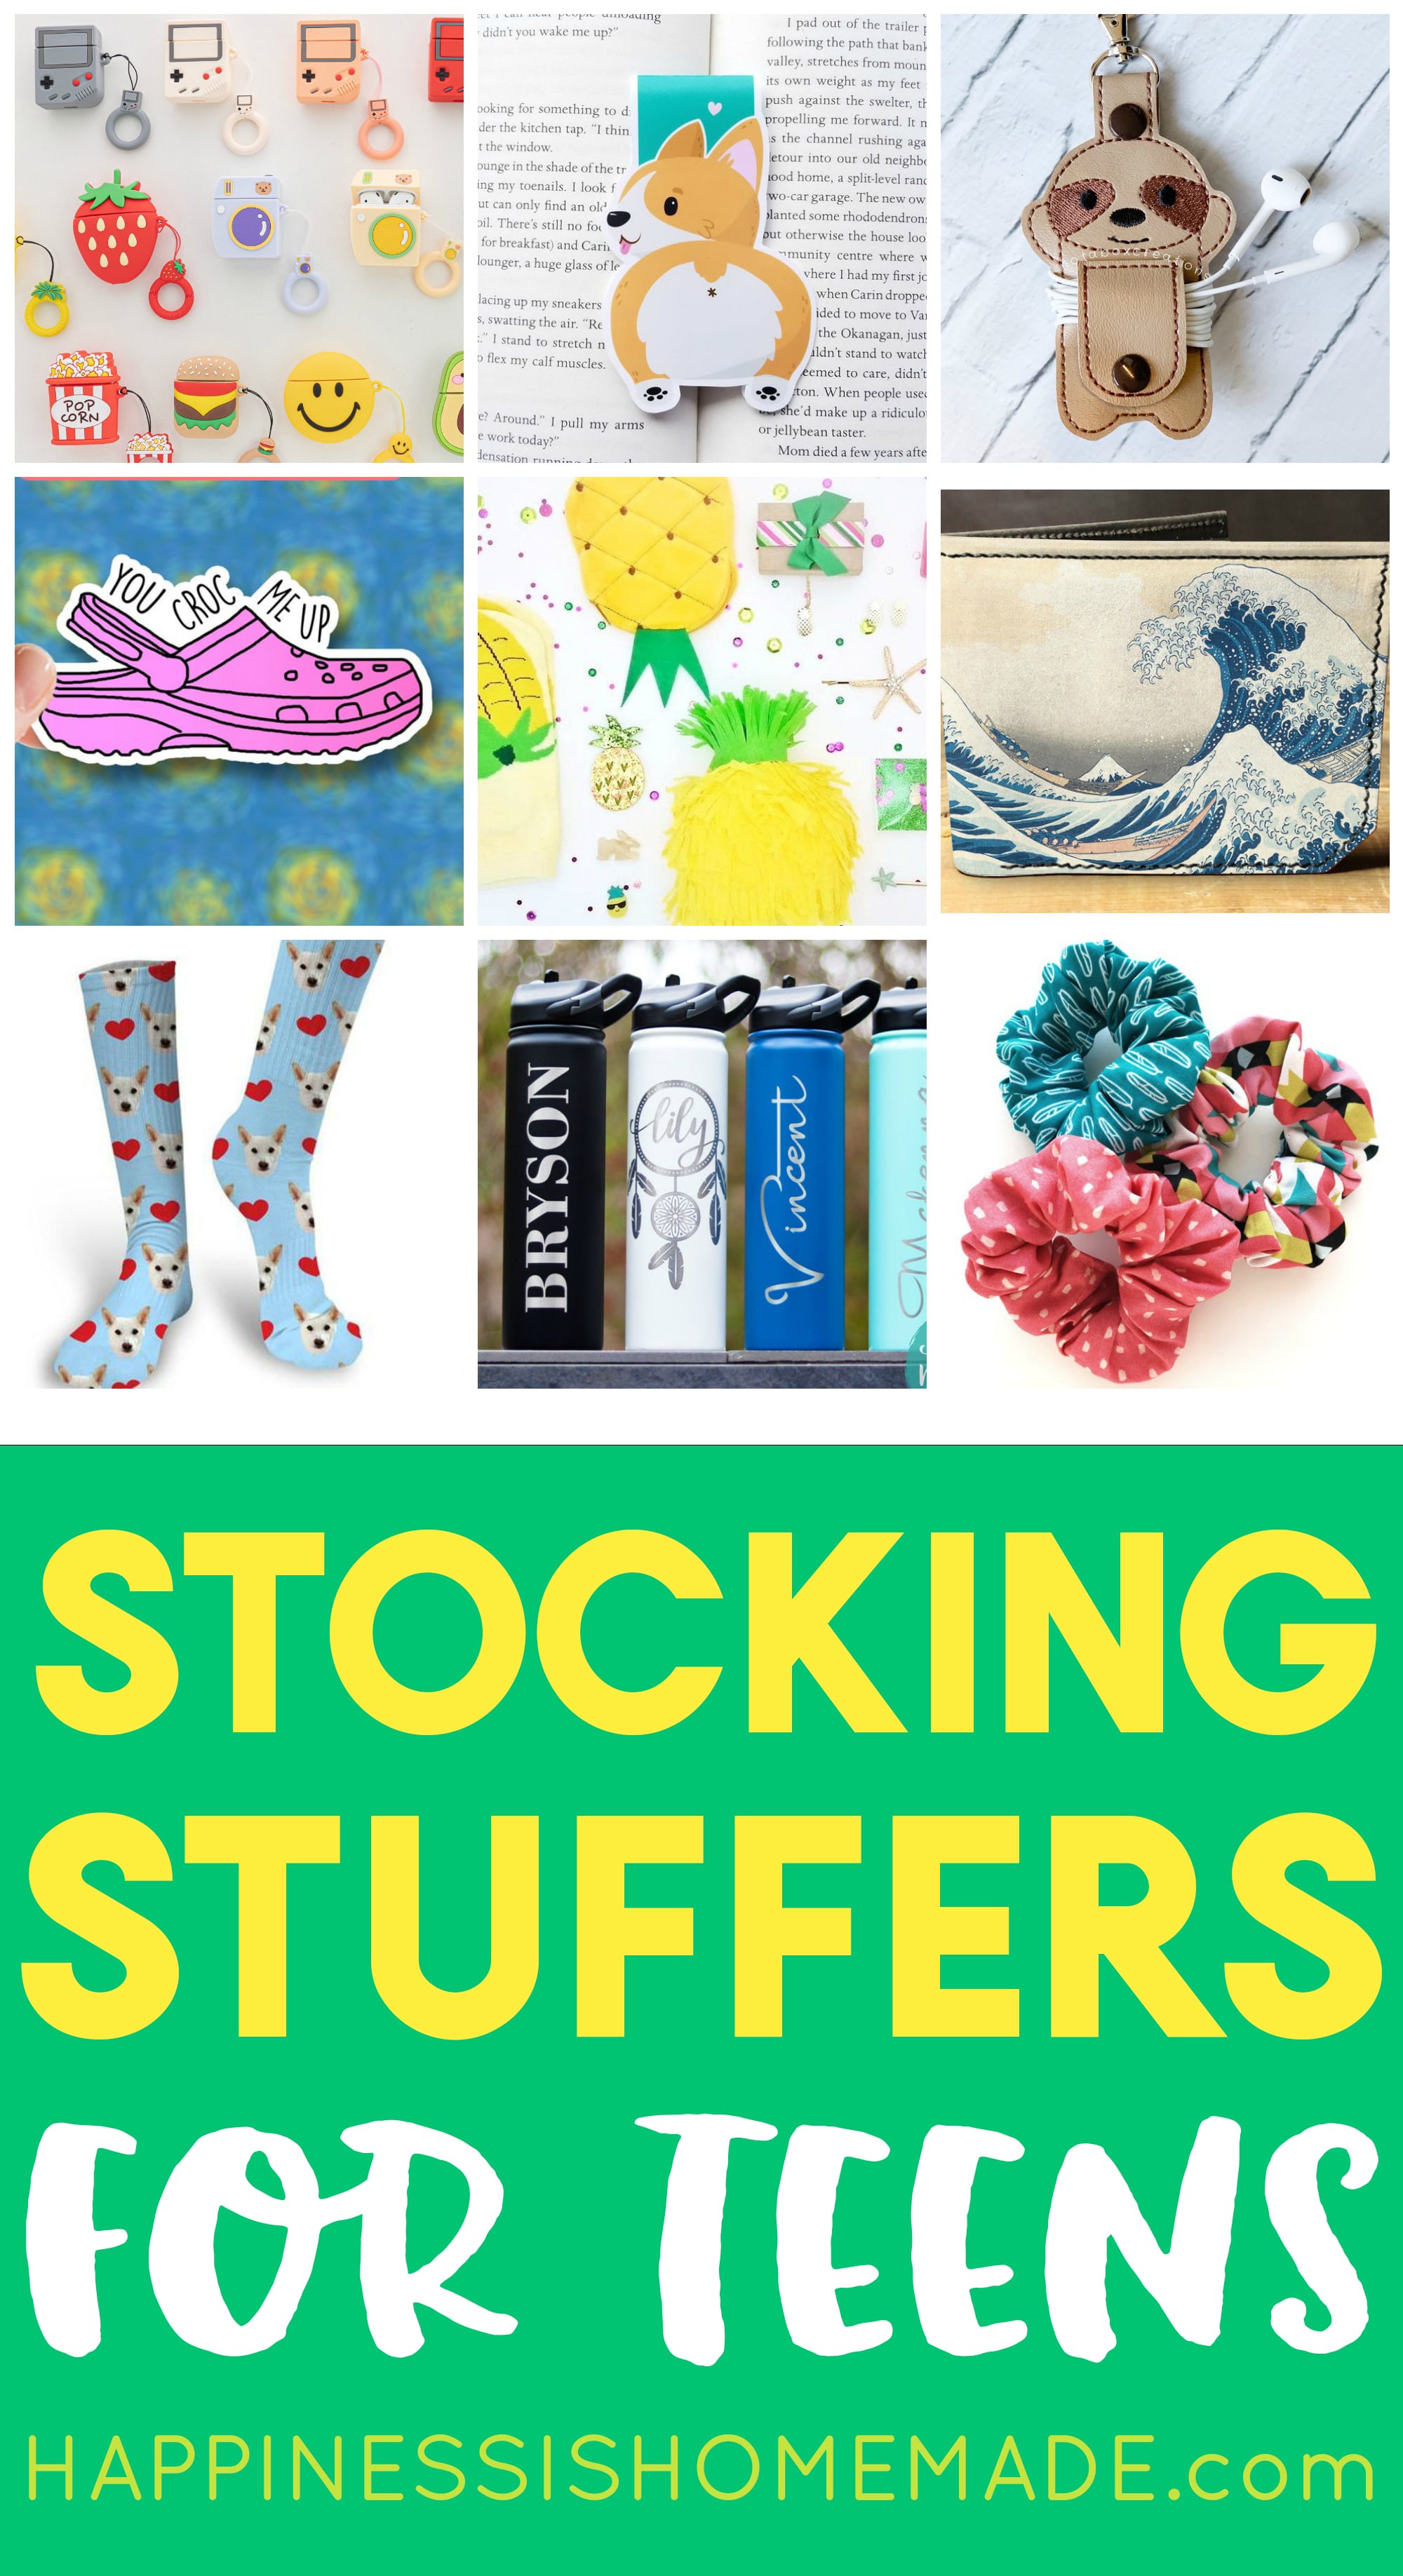 Funny Stocking Stuffers We Love - Today's Parent